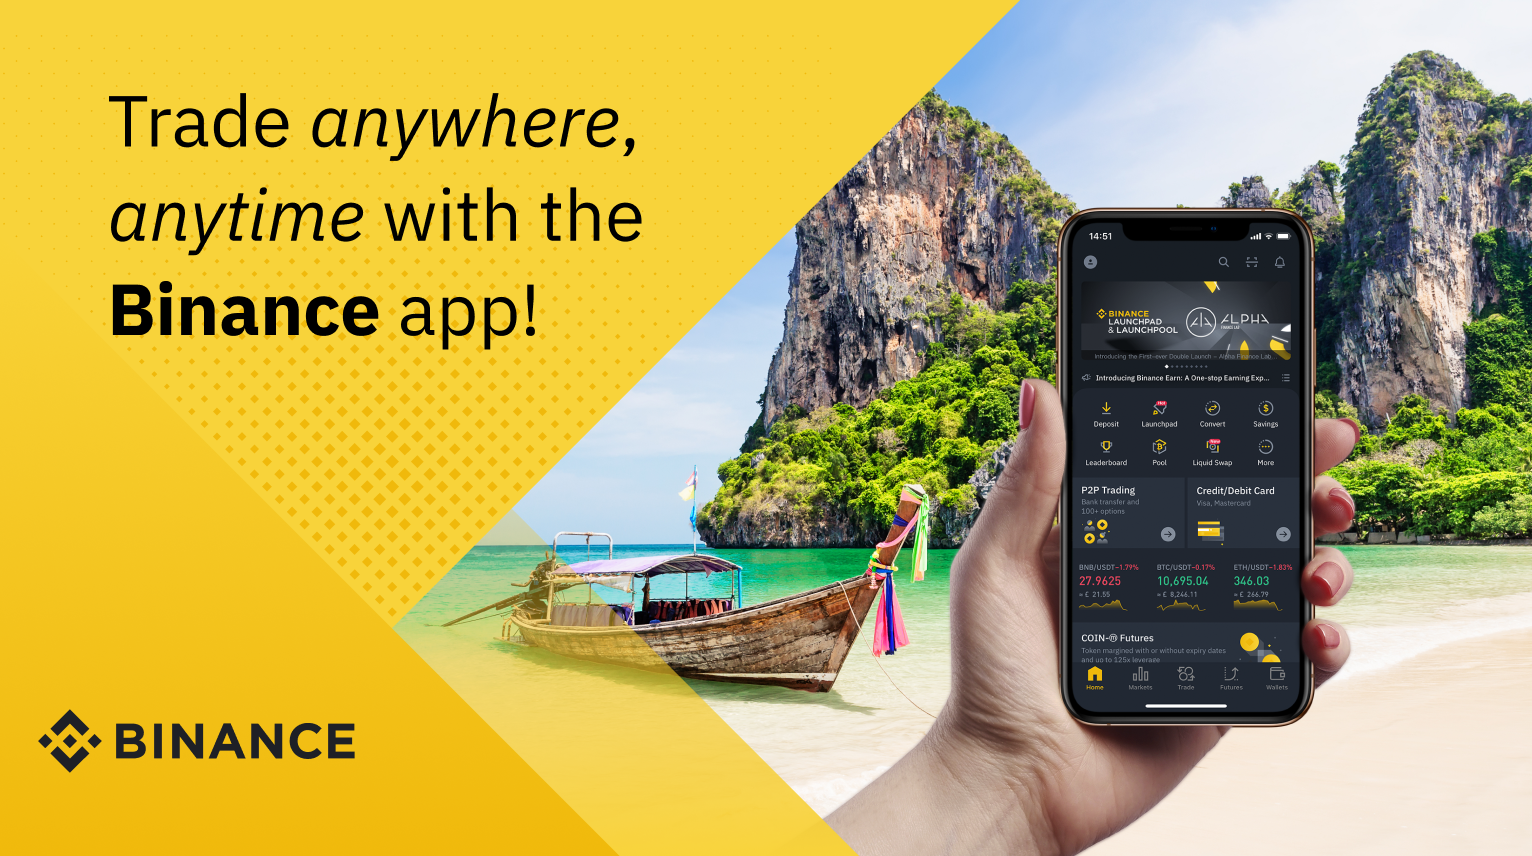 Thailand Promo: Trade Anywhere with the Binance App Challenge. $500 in USDT to be Won!